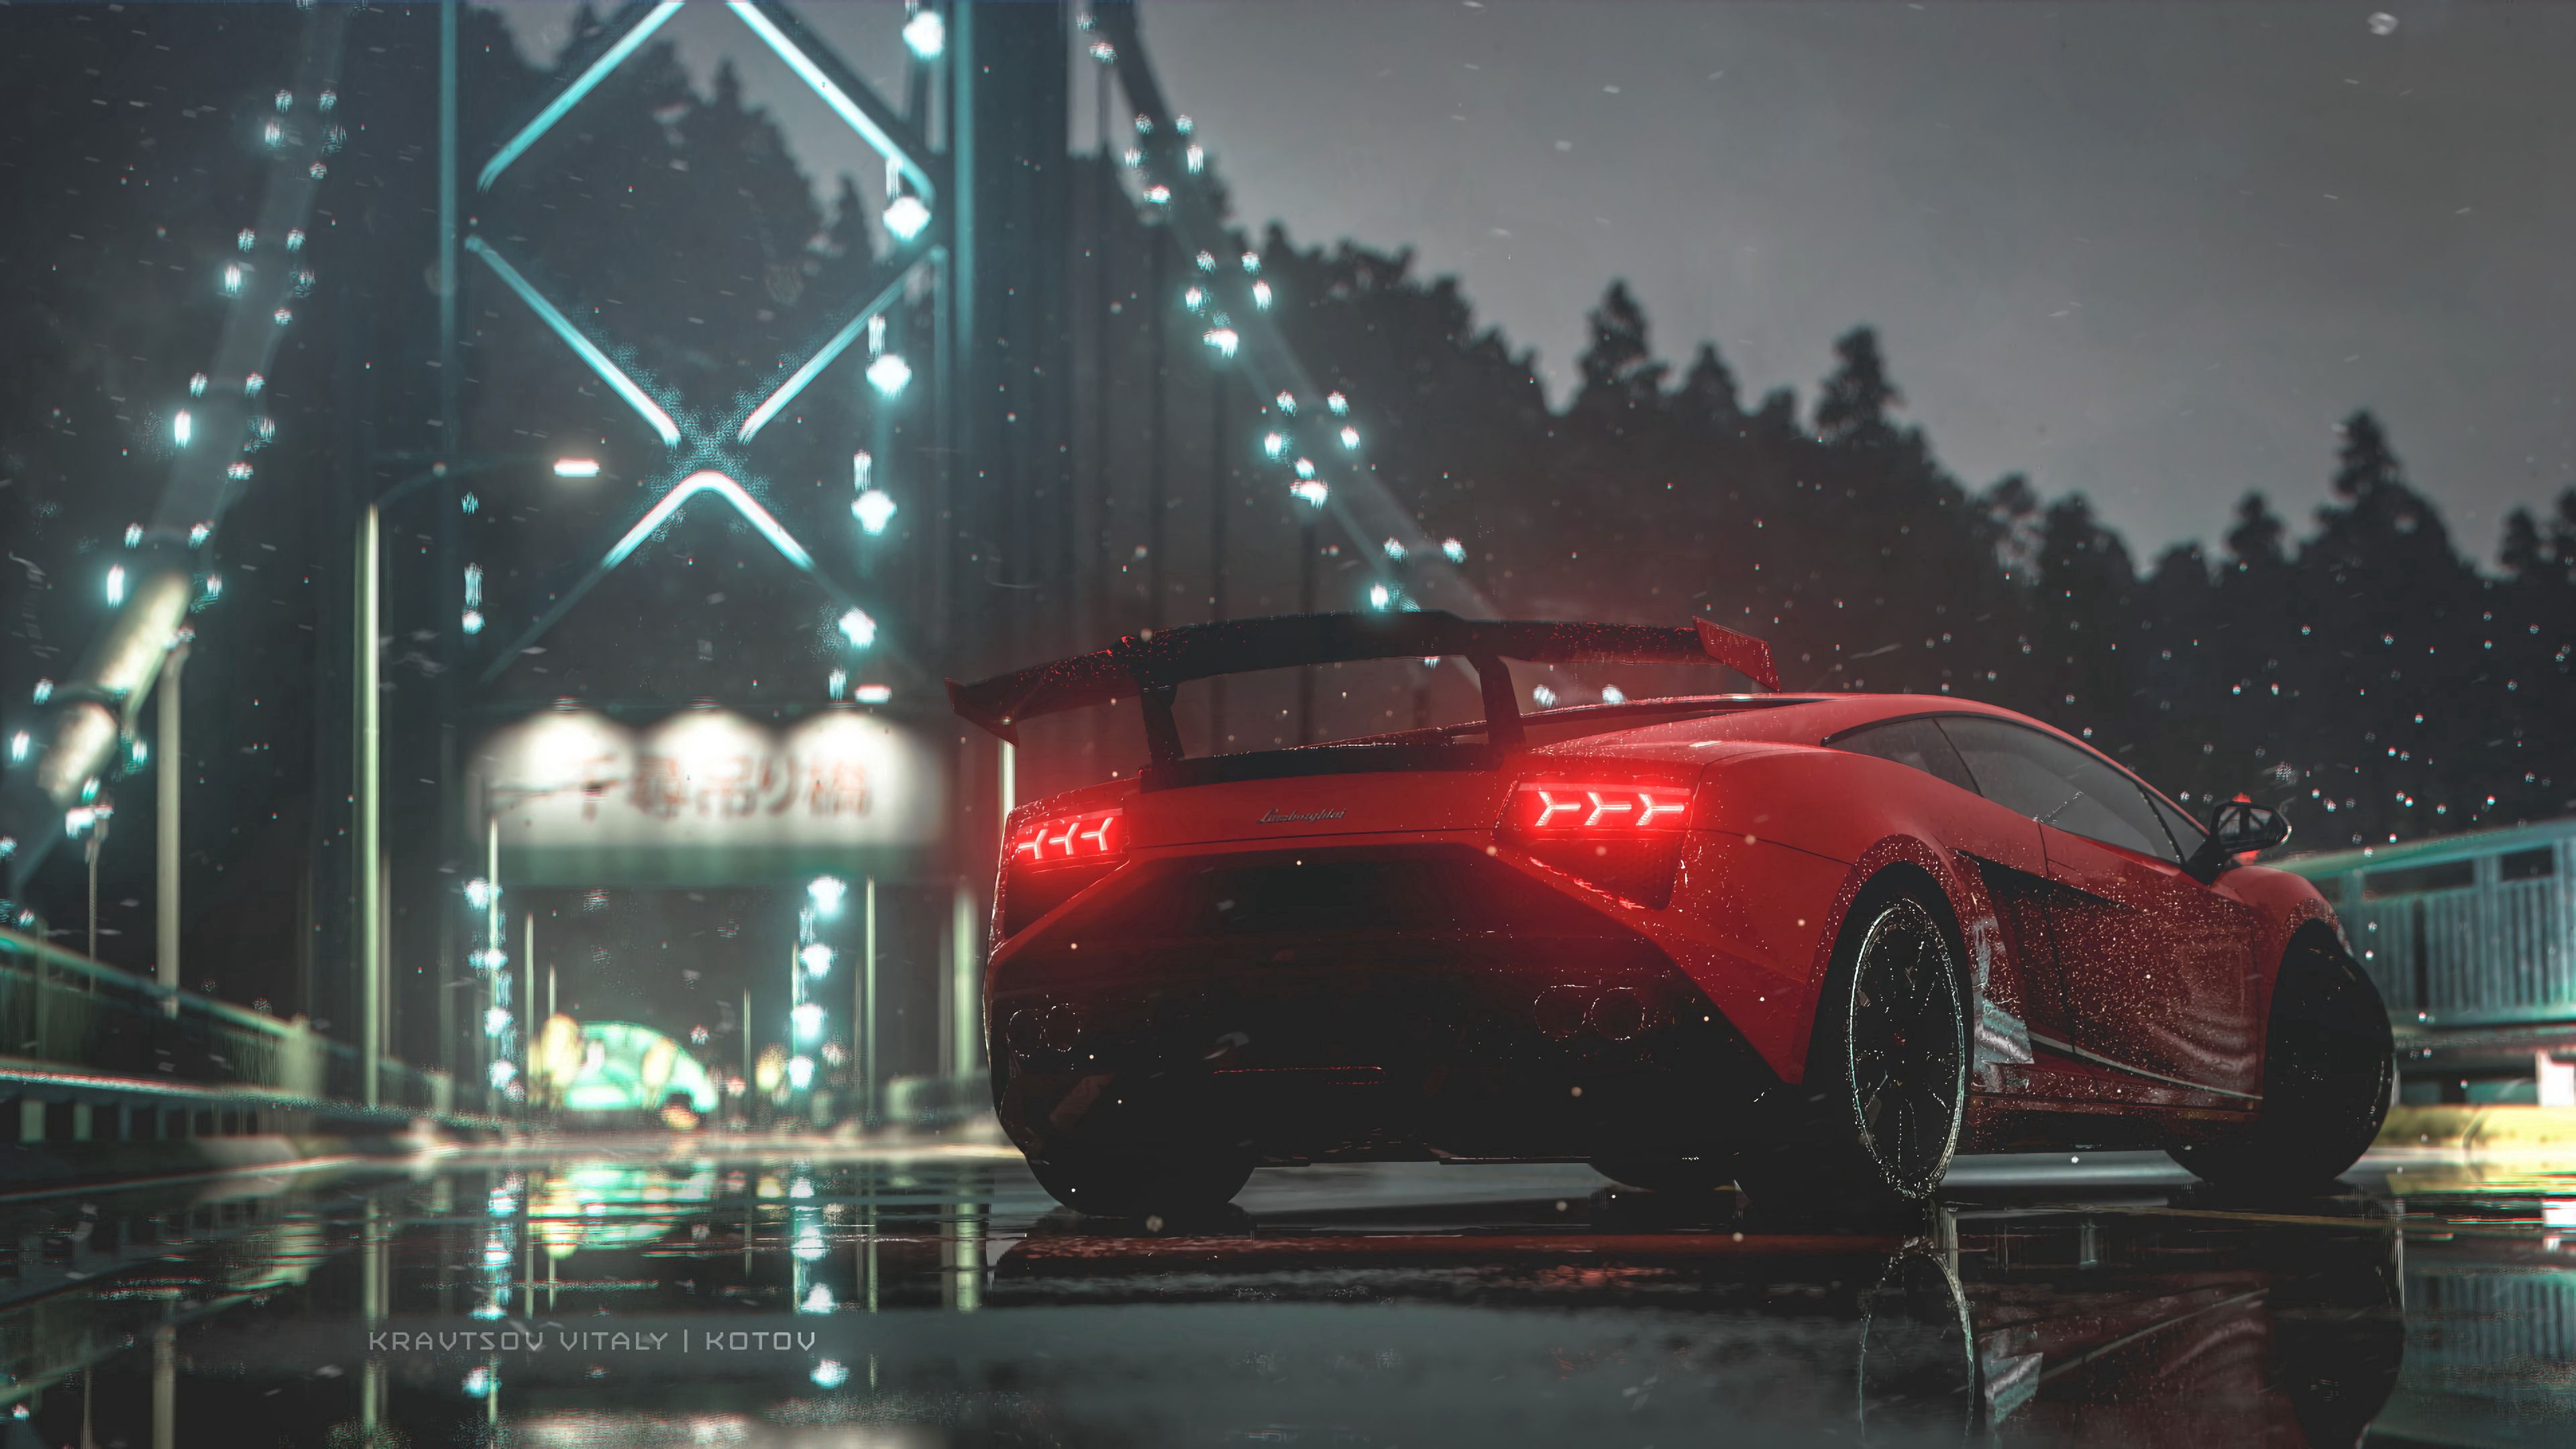 wallpapers side view, backlight, sports car, red, machine, cars, sports, illumination, wet, car